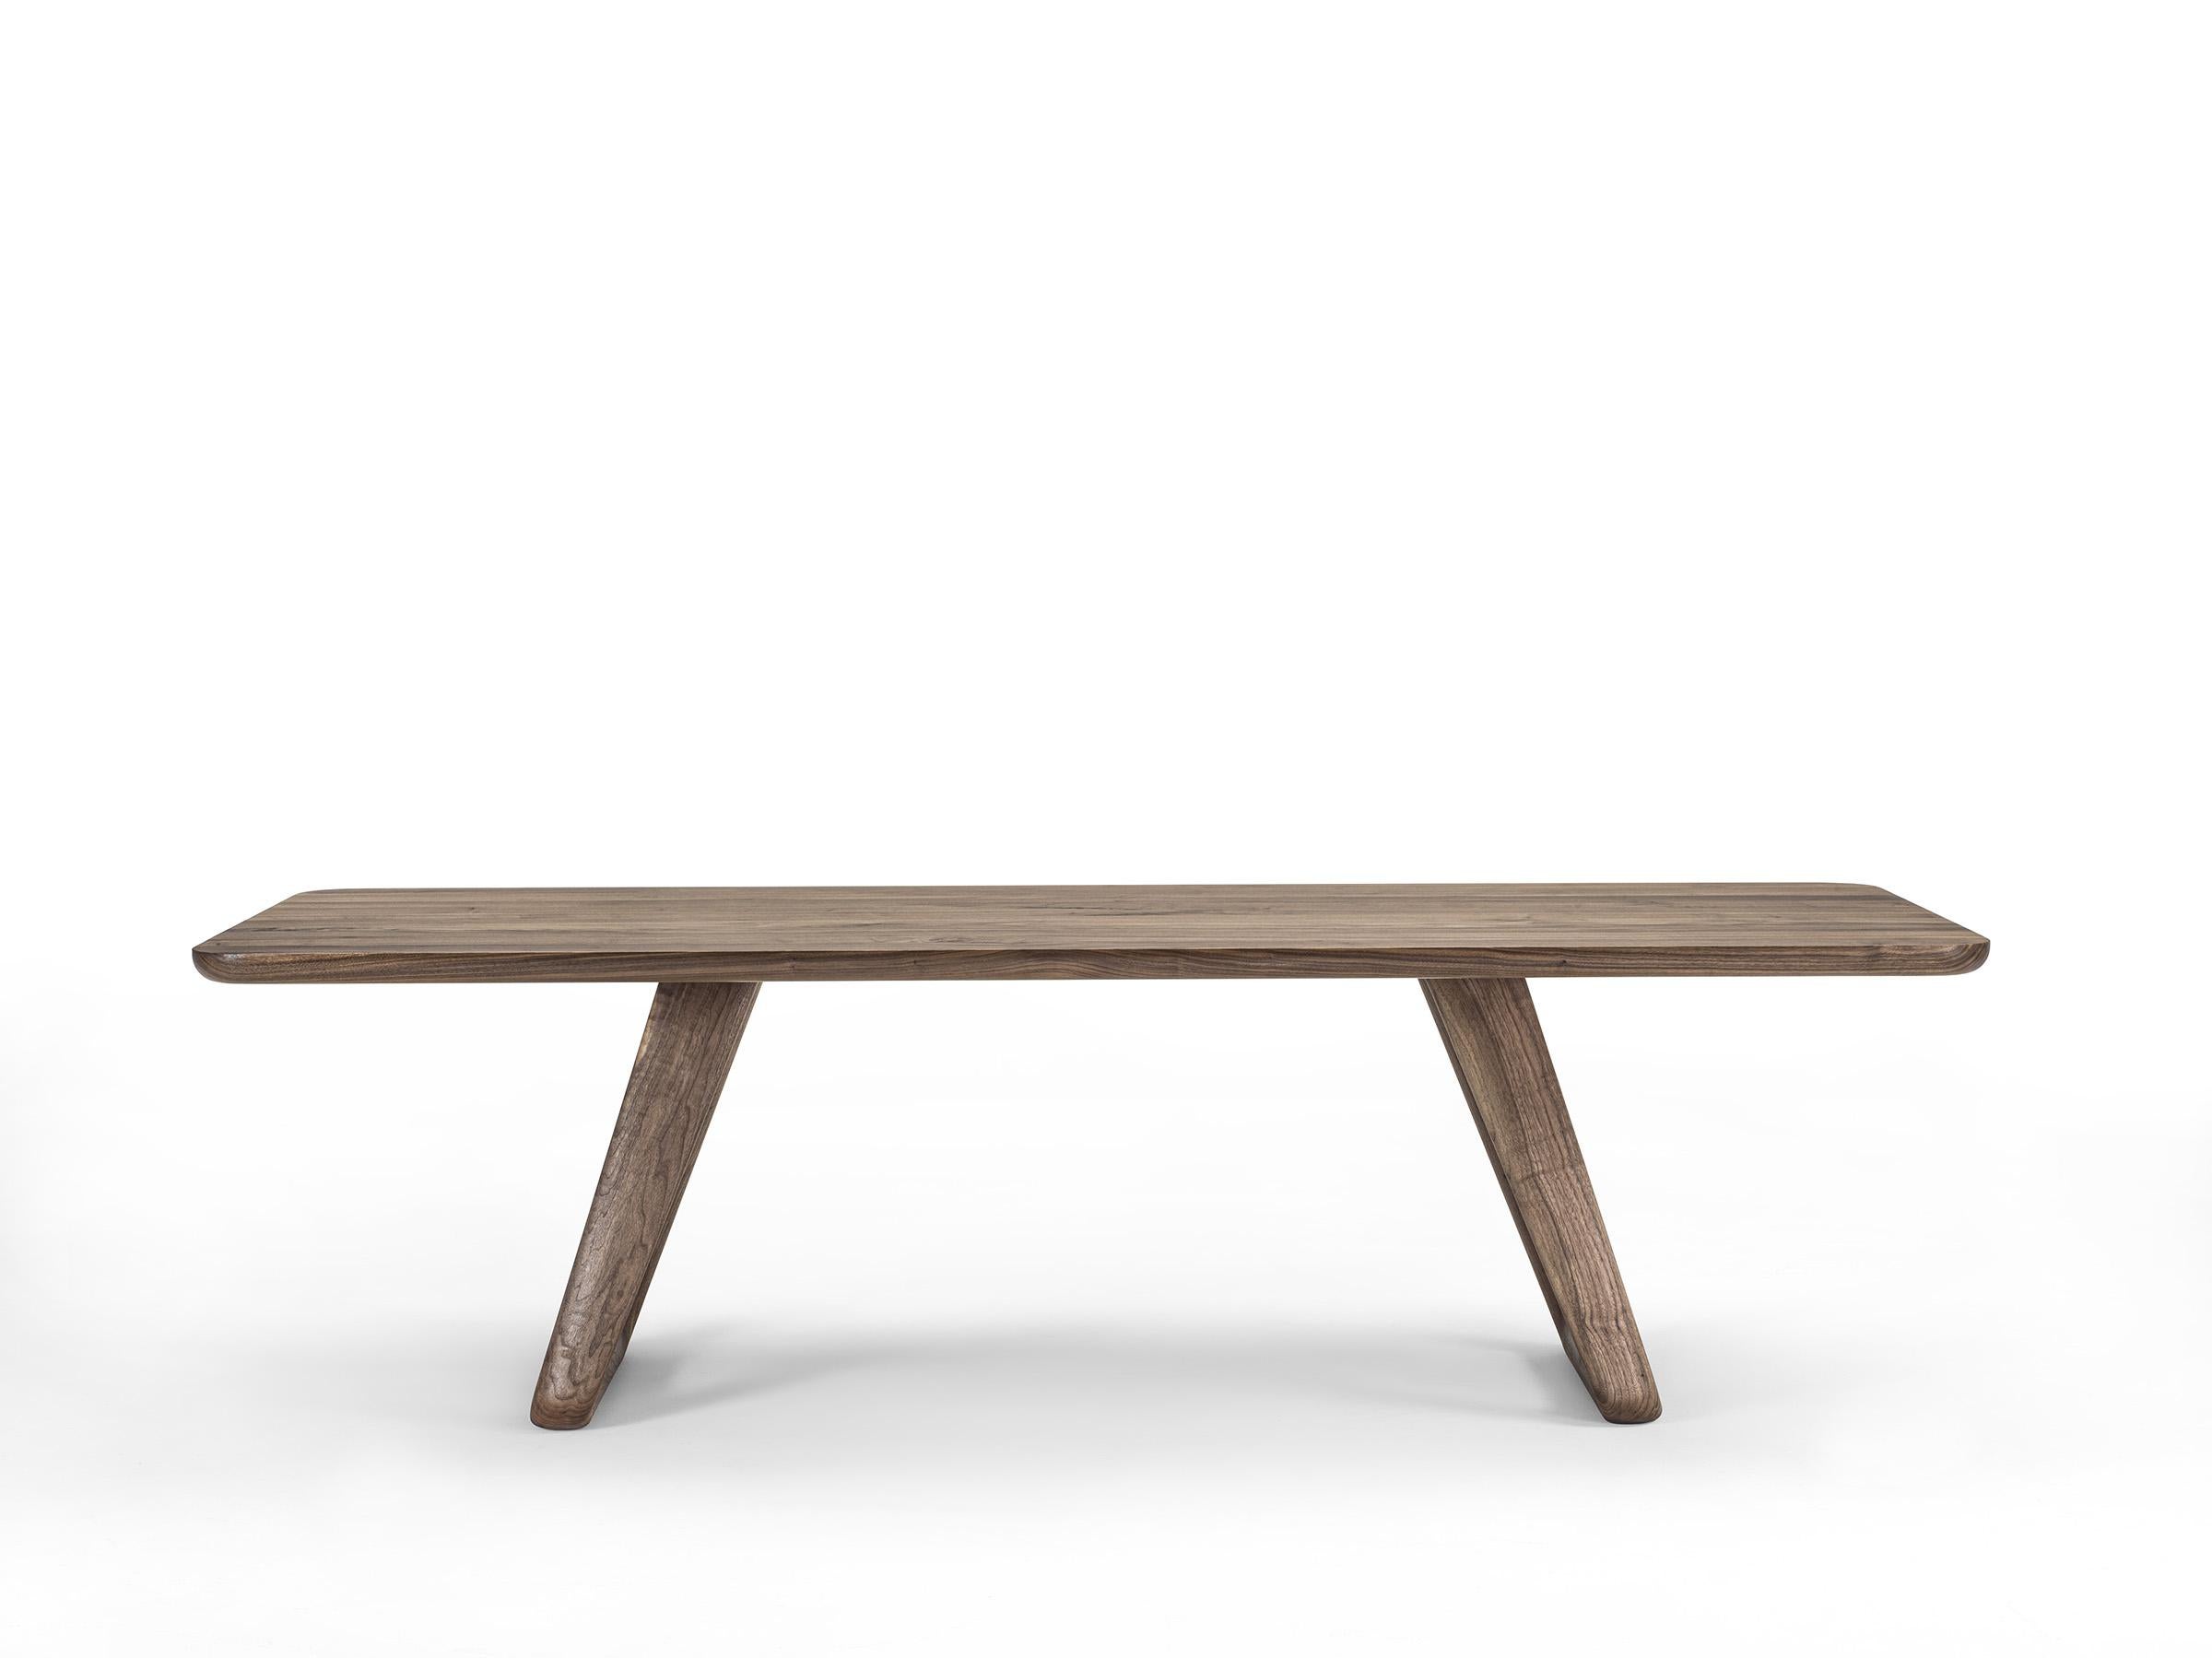 Sospiro Wood Dining Table, Designed by Claudio Bellini, Made in Italy For Sale 1